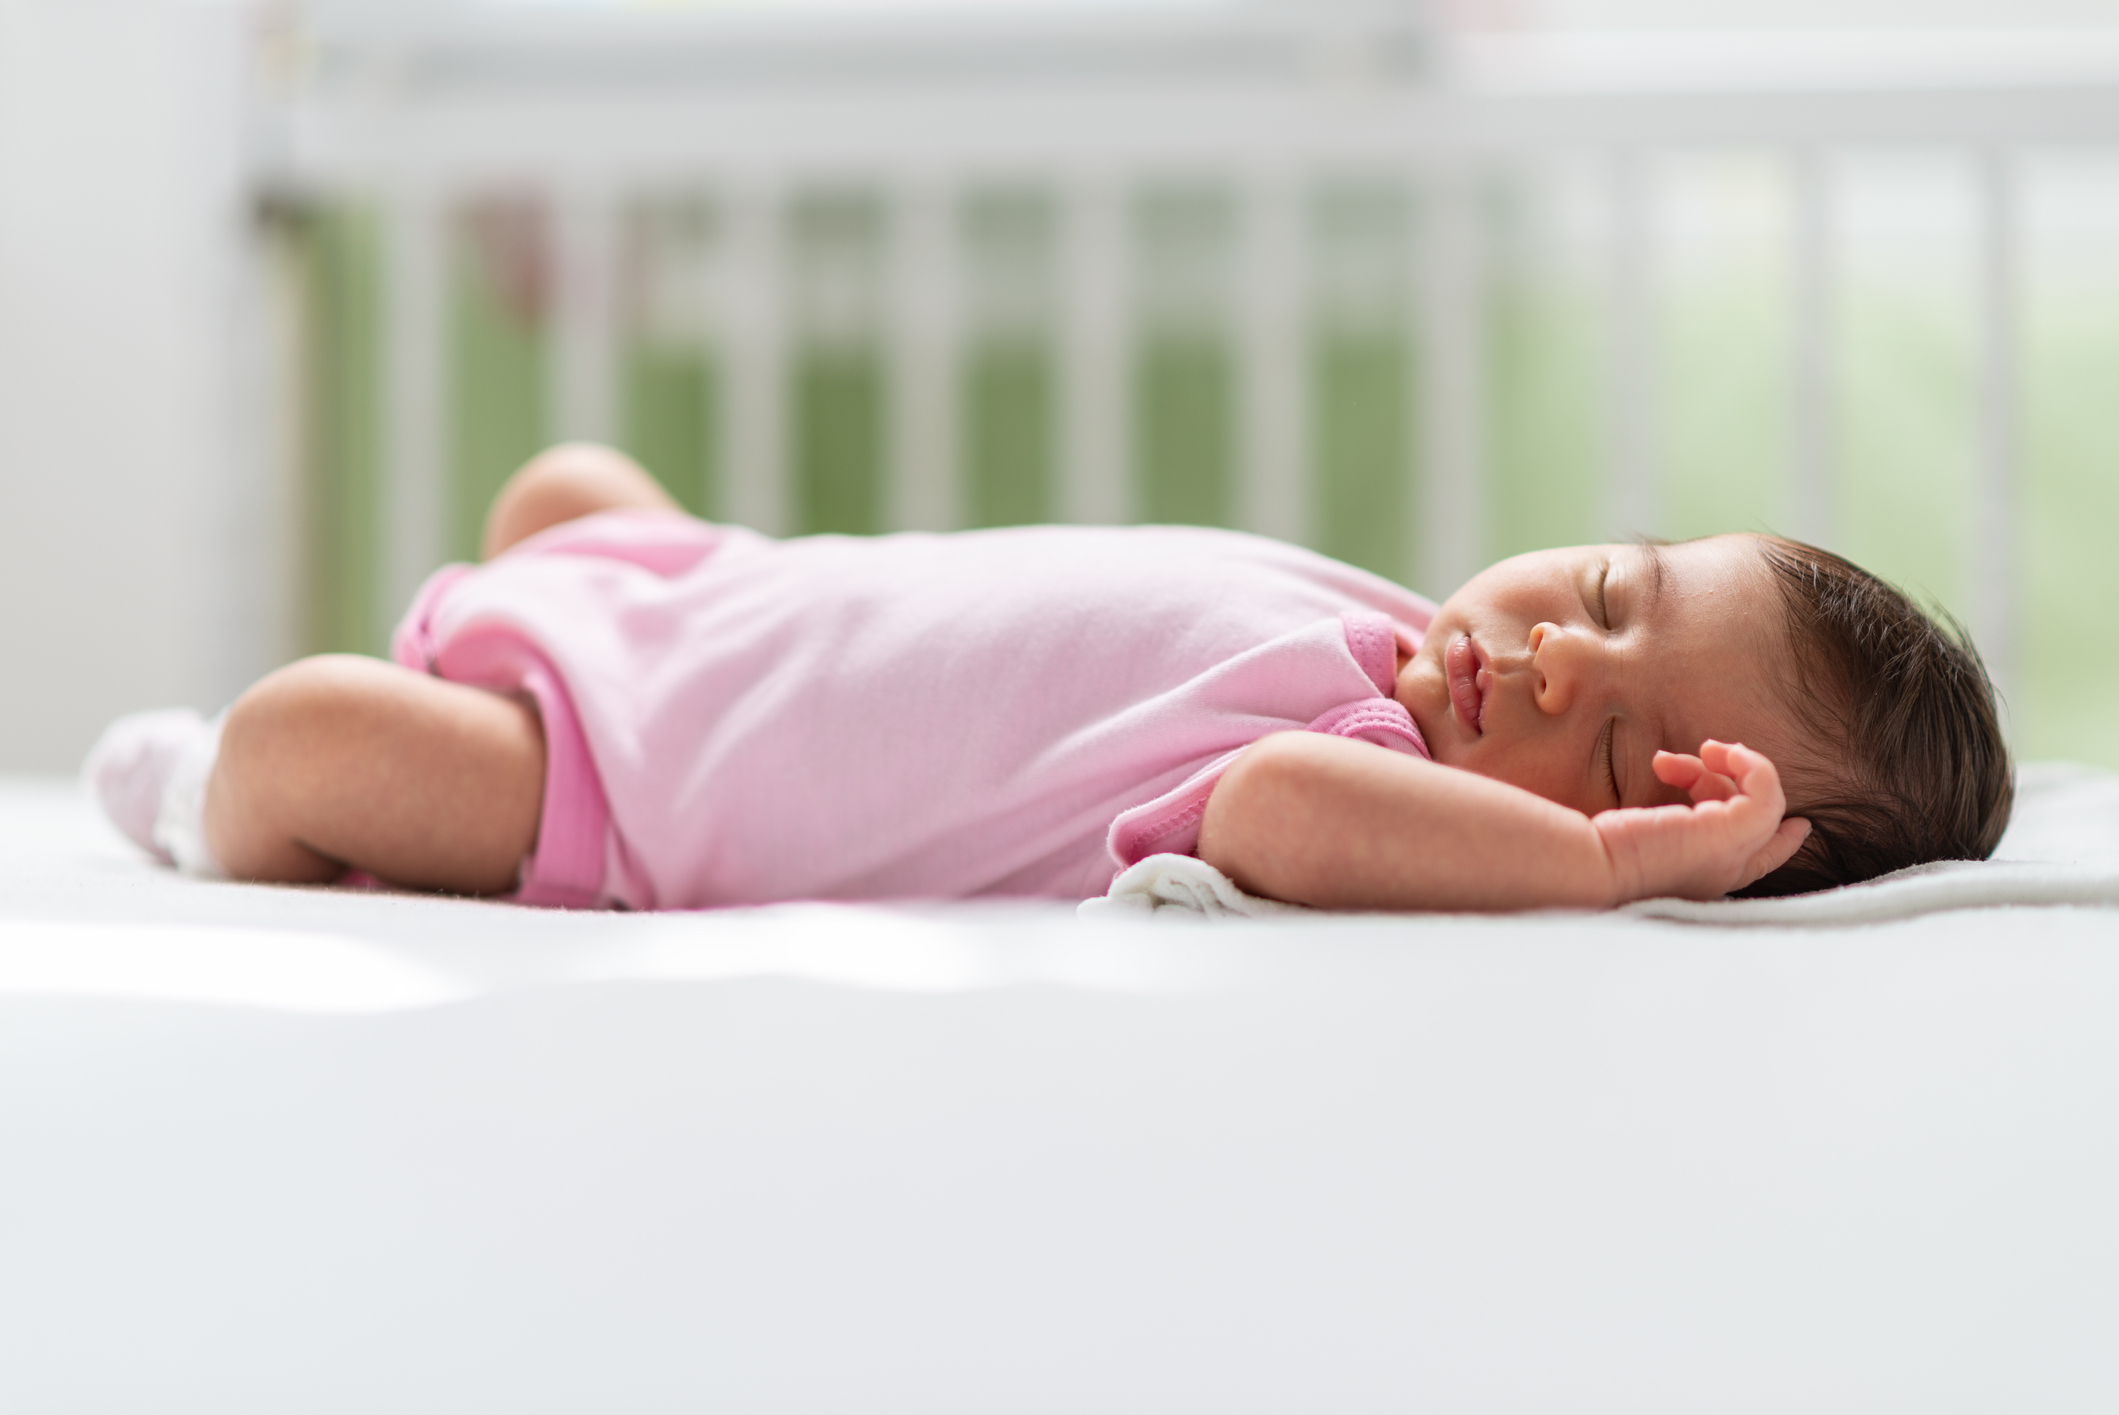 research on sids shows that babies should be